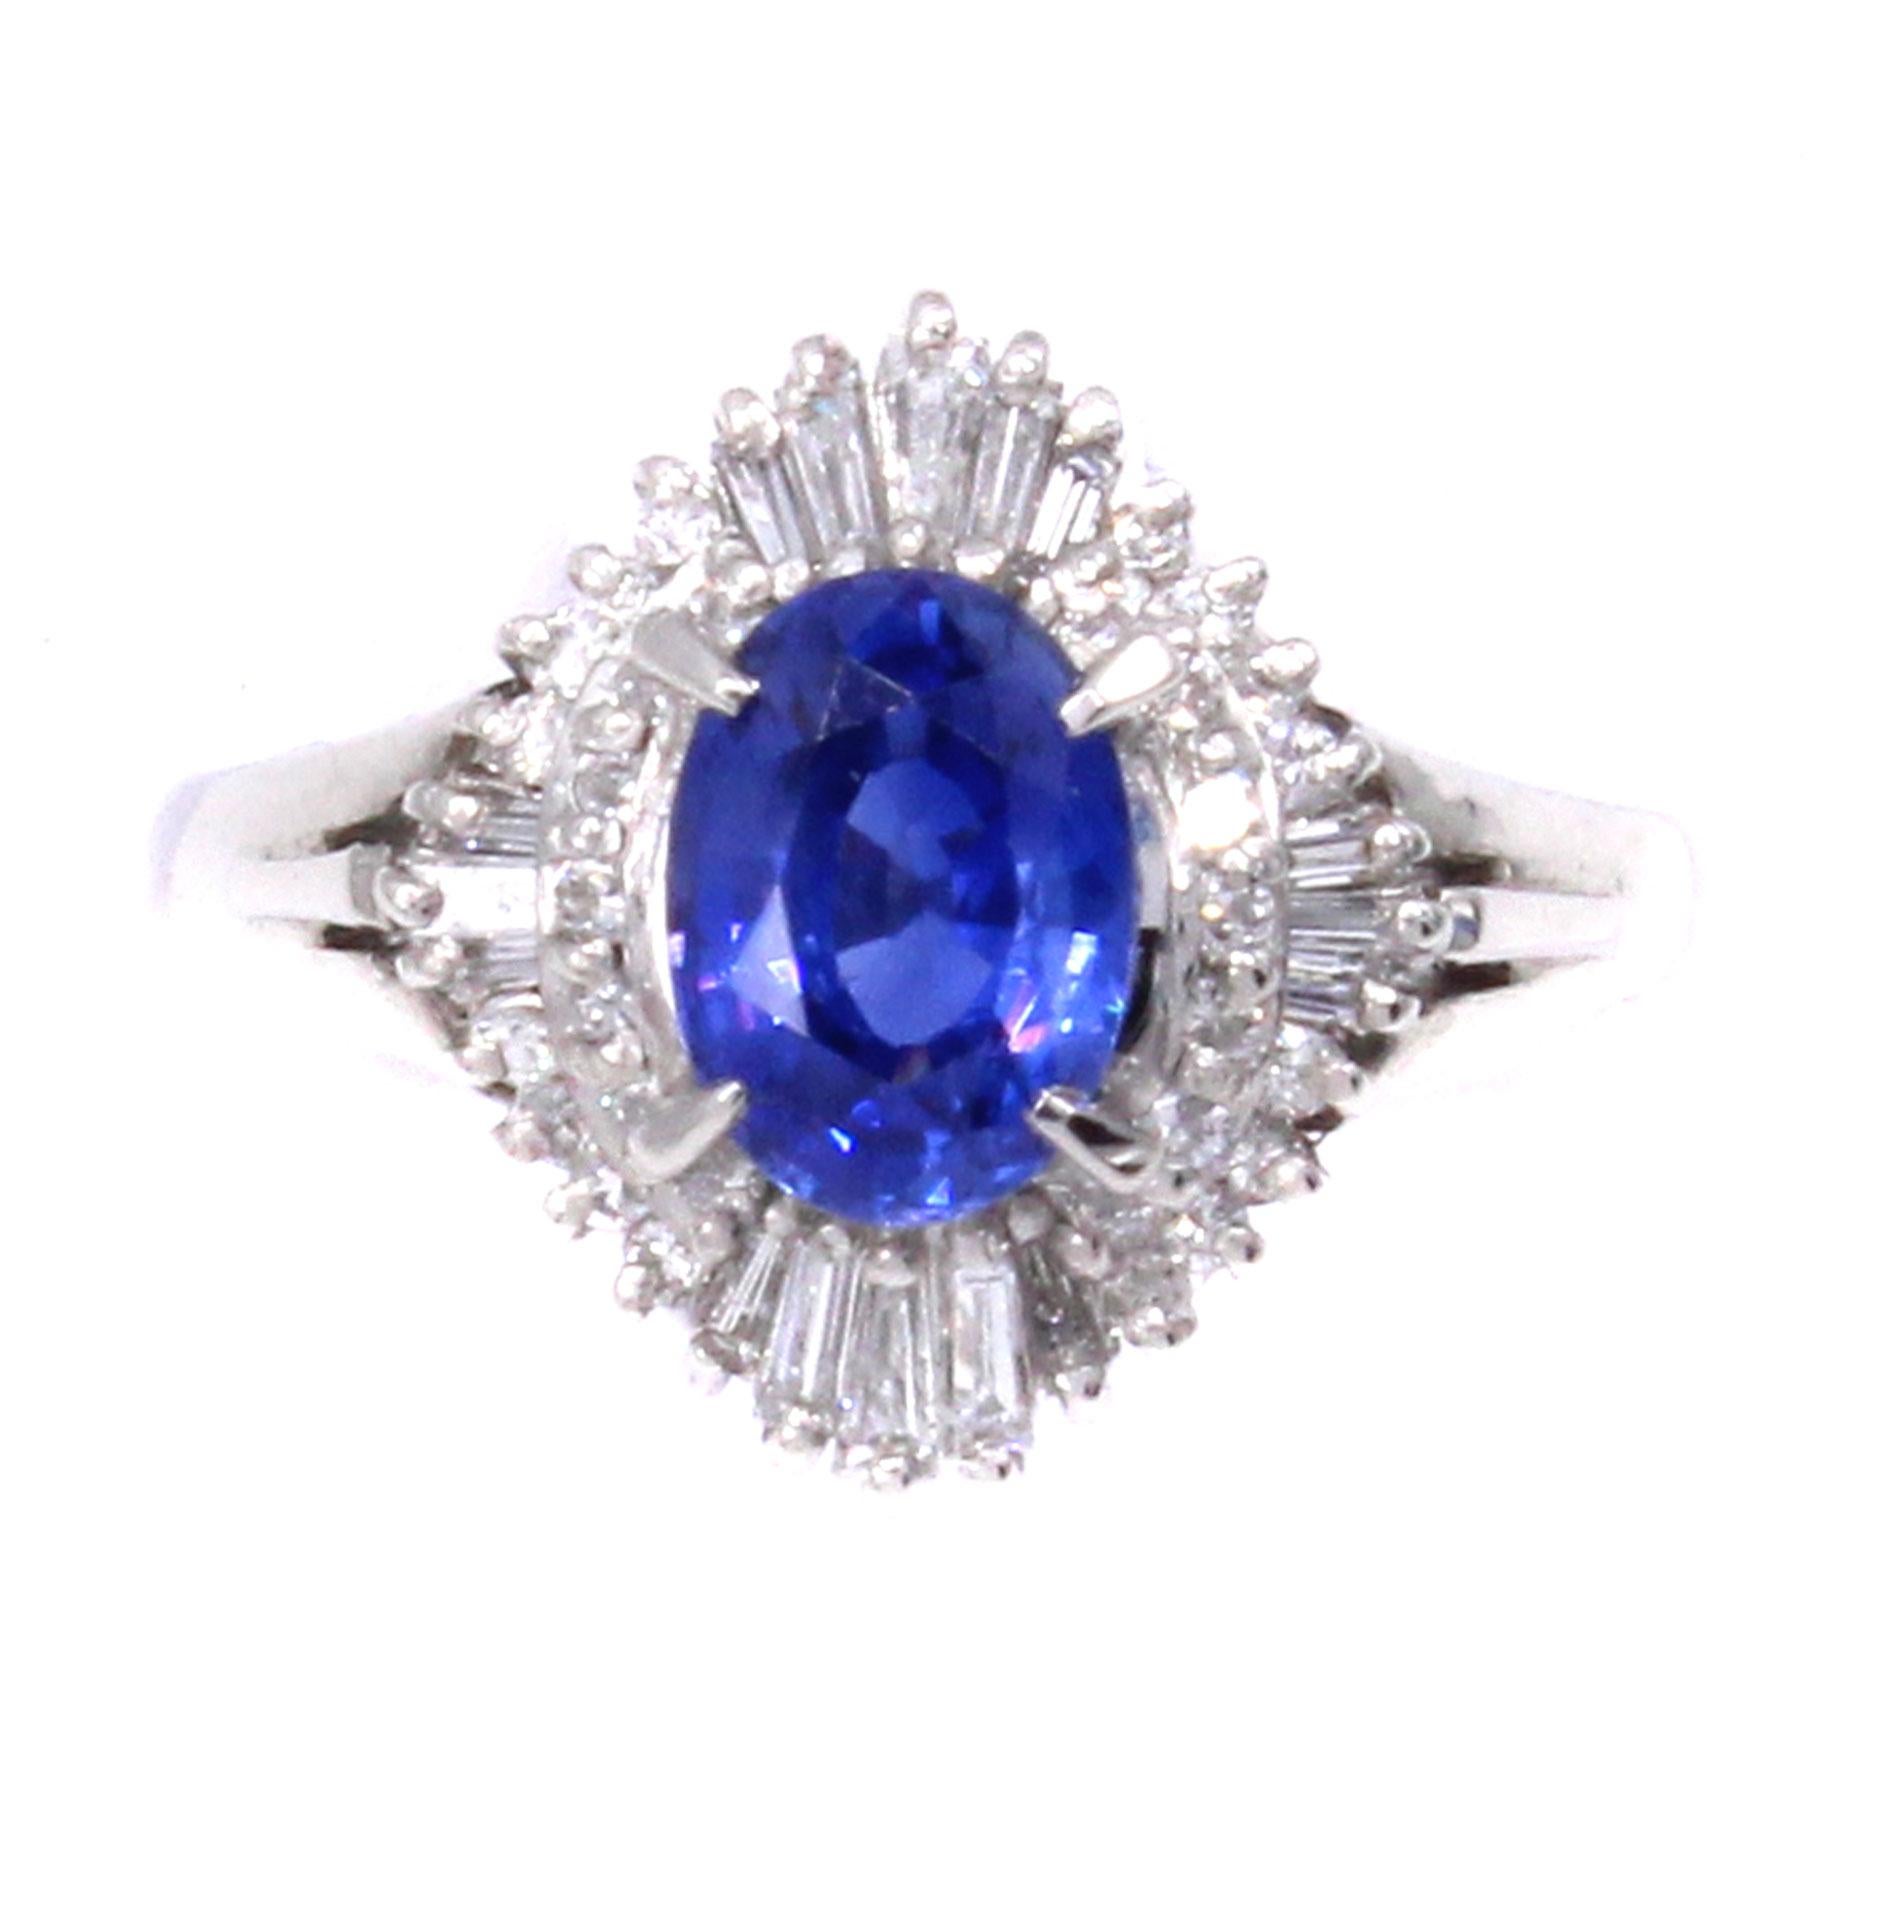 A beautiful deep sky blue well saturated oval sapphire weighing 1.51 carats is the center piece of this lovely 1970s ring. Masterfully hand-crafted in platinum, the center gem is embellished by perfectly matched bright white and sparkly round and